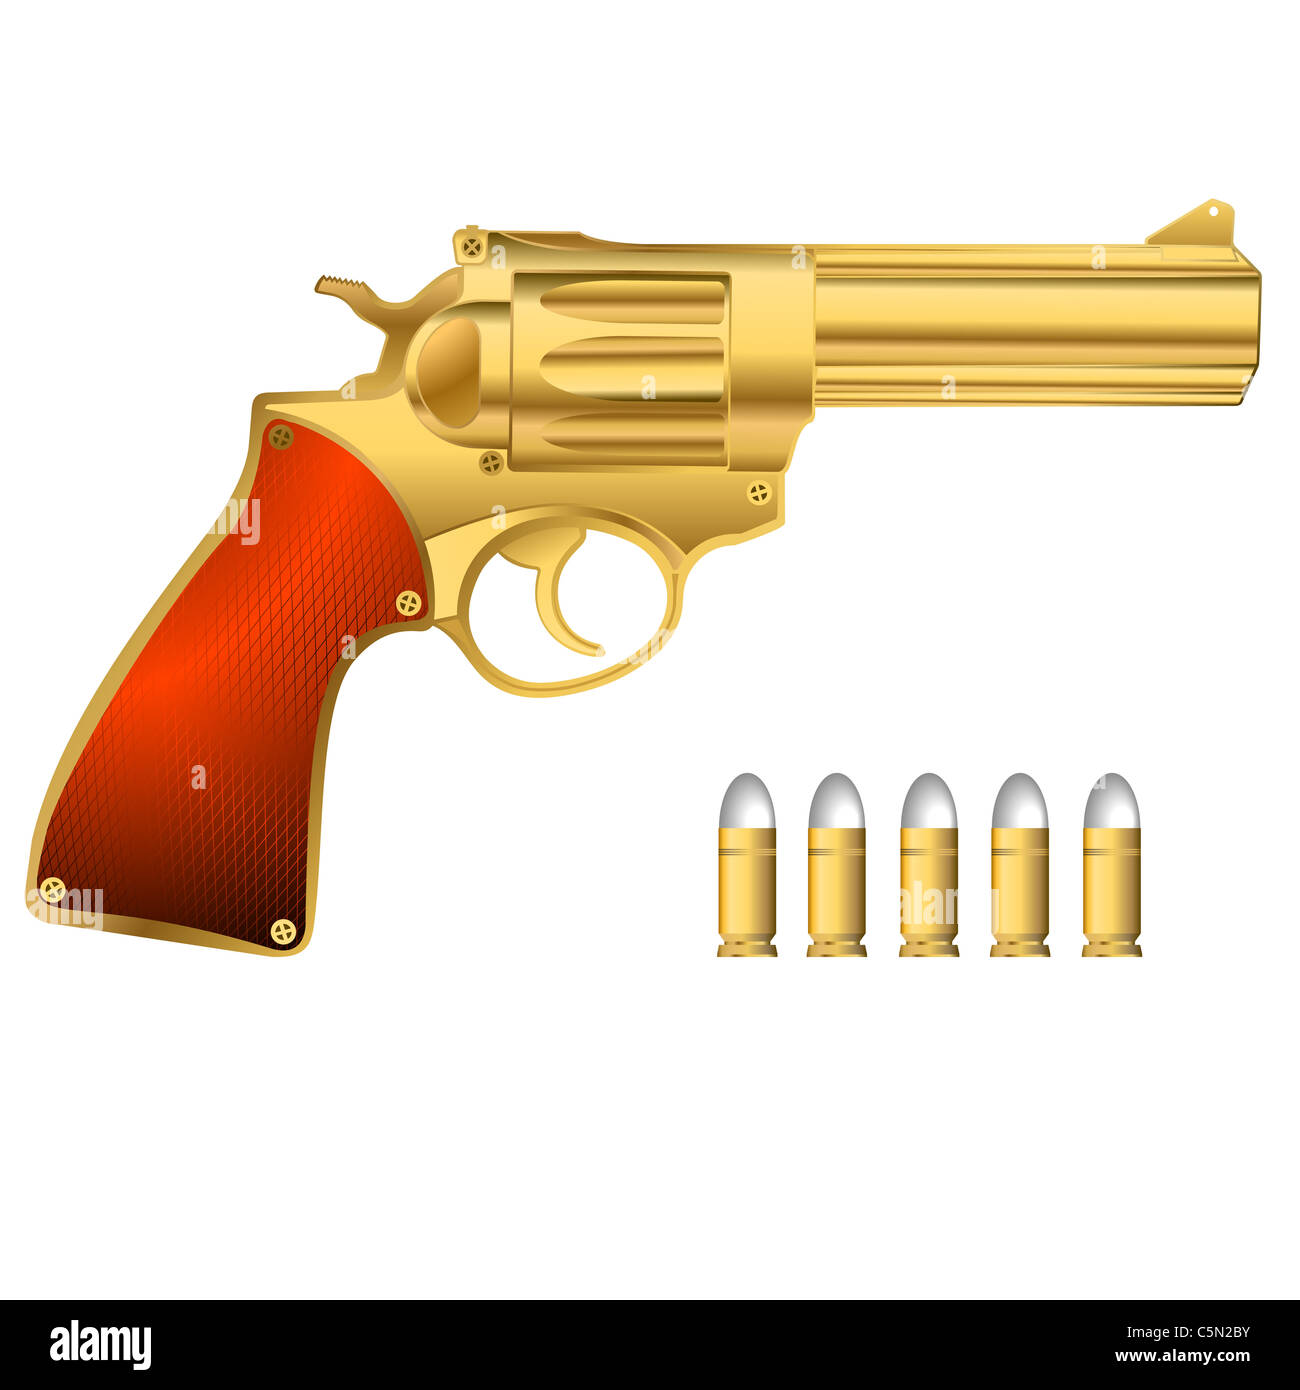 Golden revolver and bullets, isolated objects over white background Stock Photo